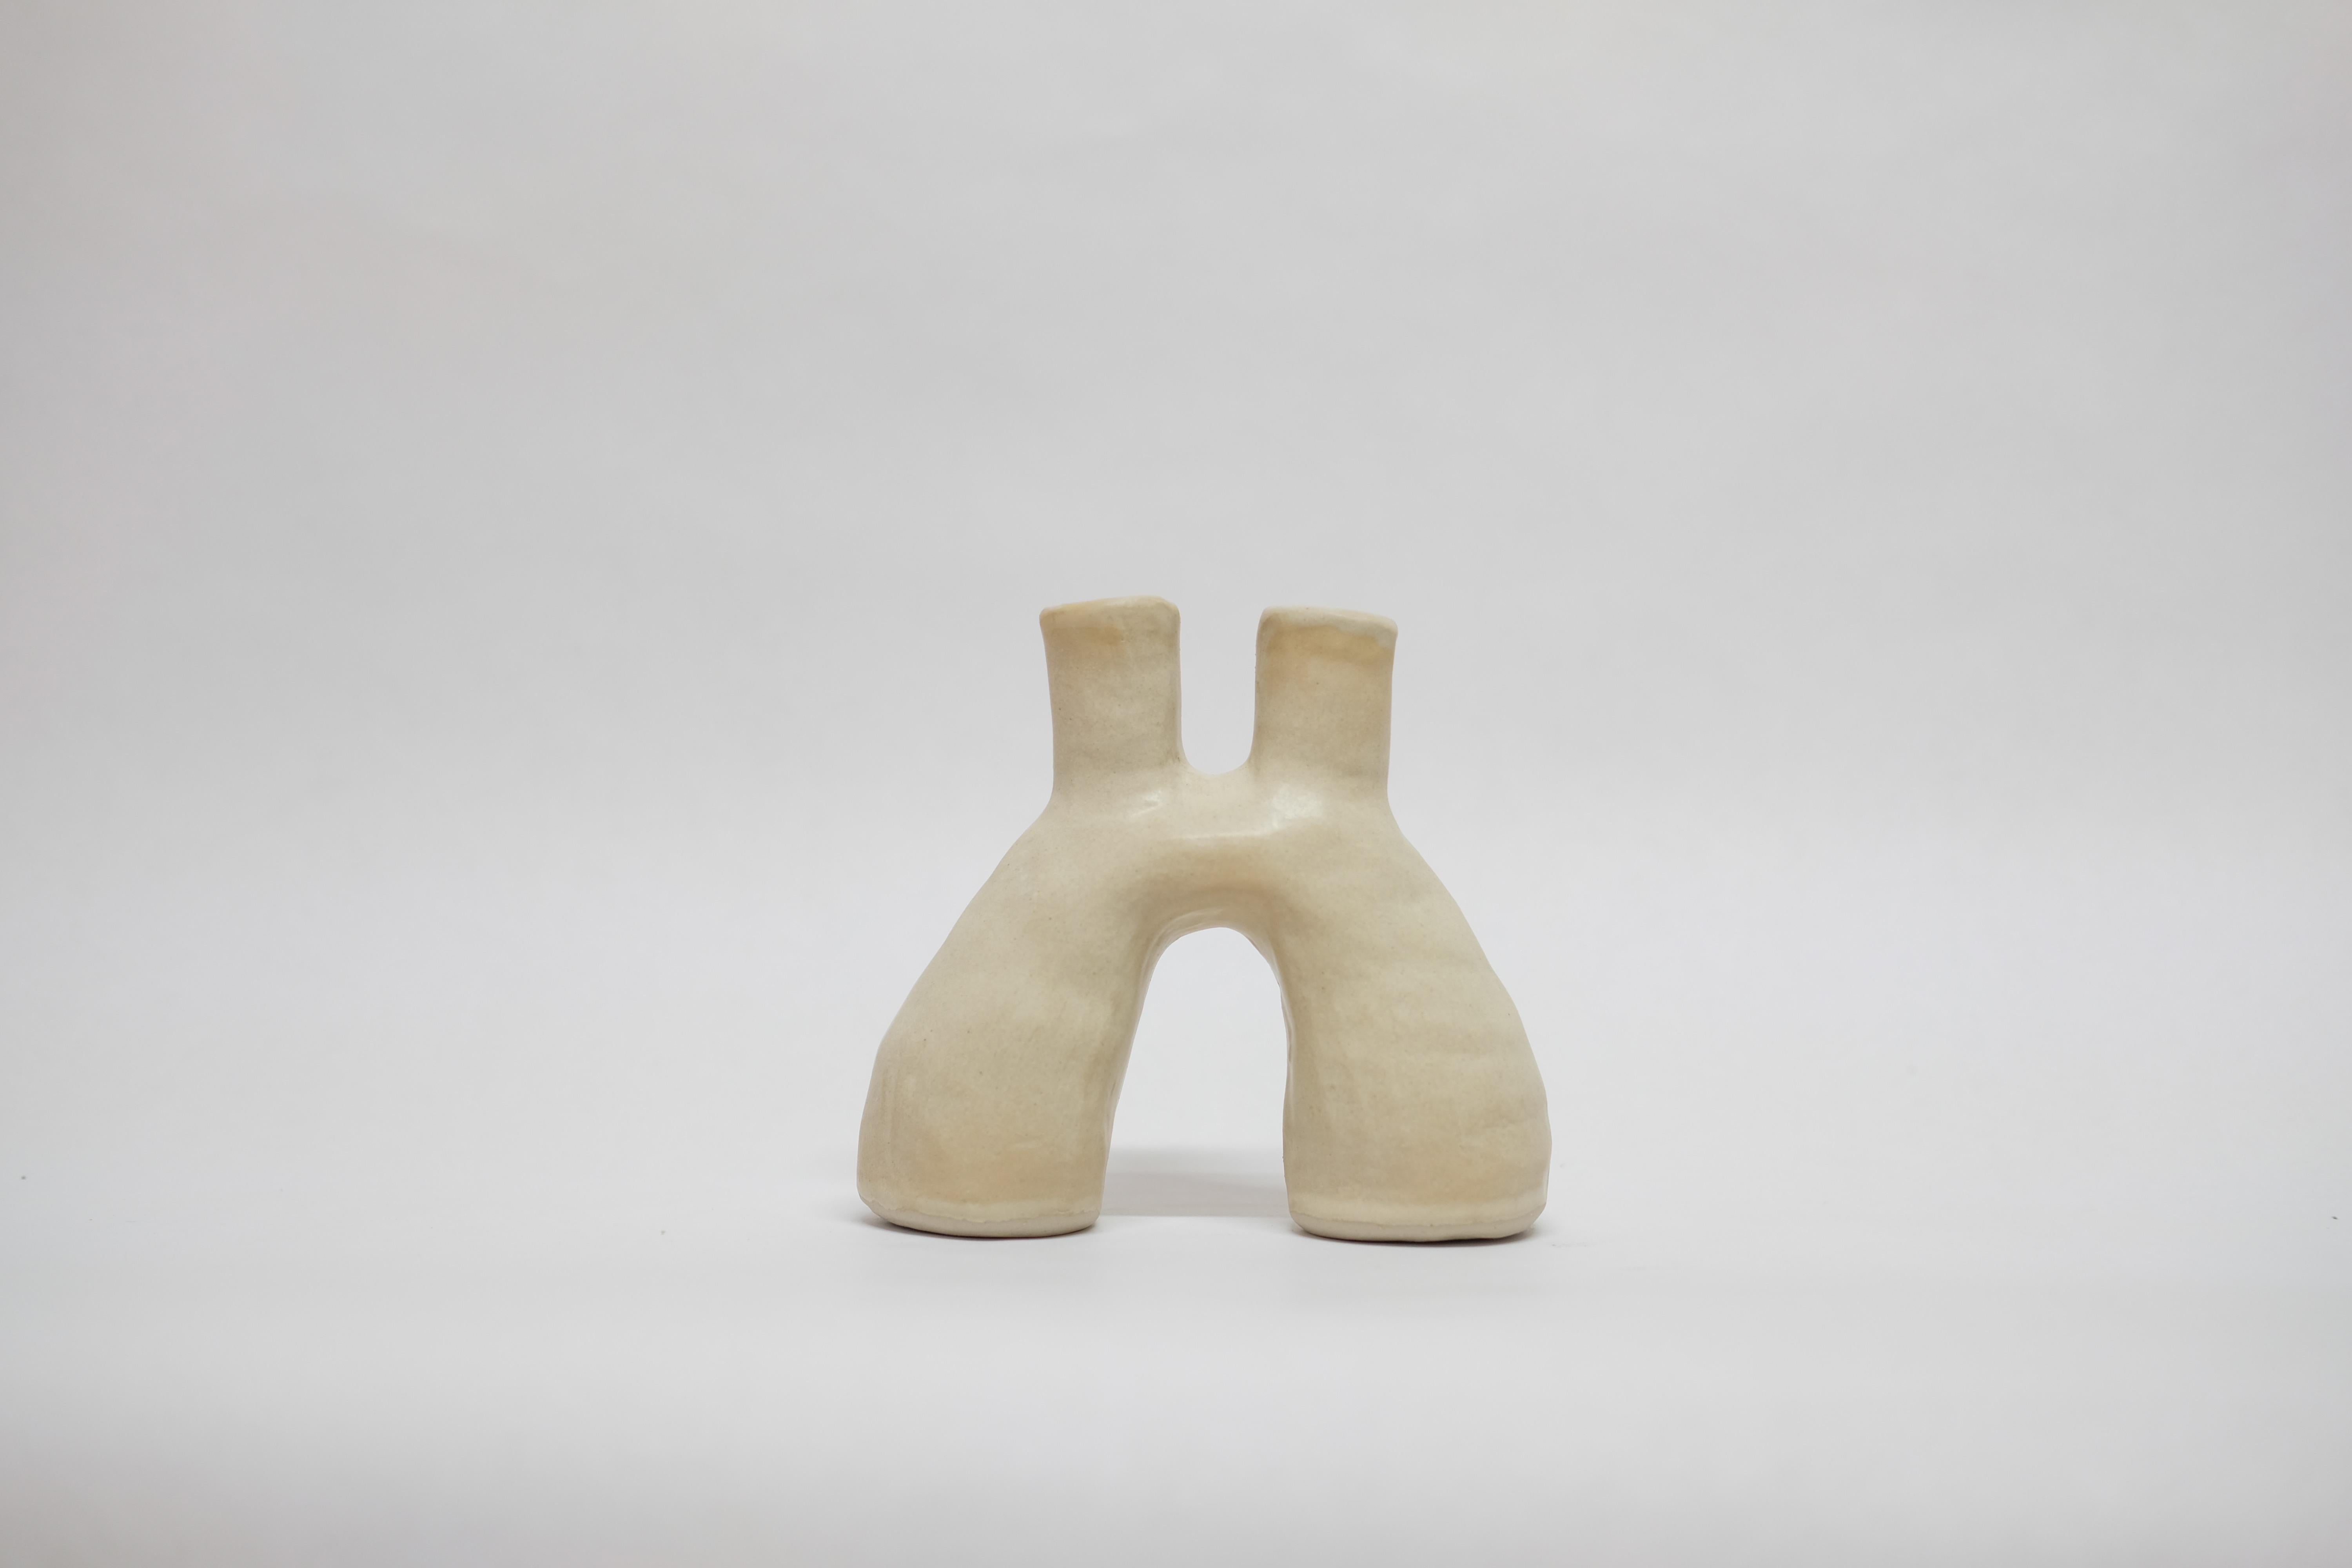 Butter milk portal stoneware vase by Camila Apaez
One of a kind
Materials: Stoneware
Dimensions: 7 x 17 x 14 cm

This year has been shaped by the topographies of our homes and the uncertainty of our time. We have found solace in the humbleness